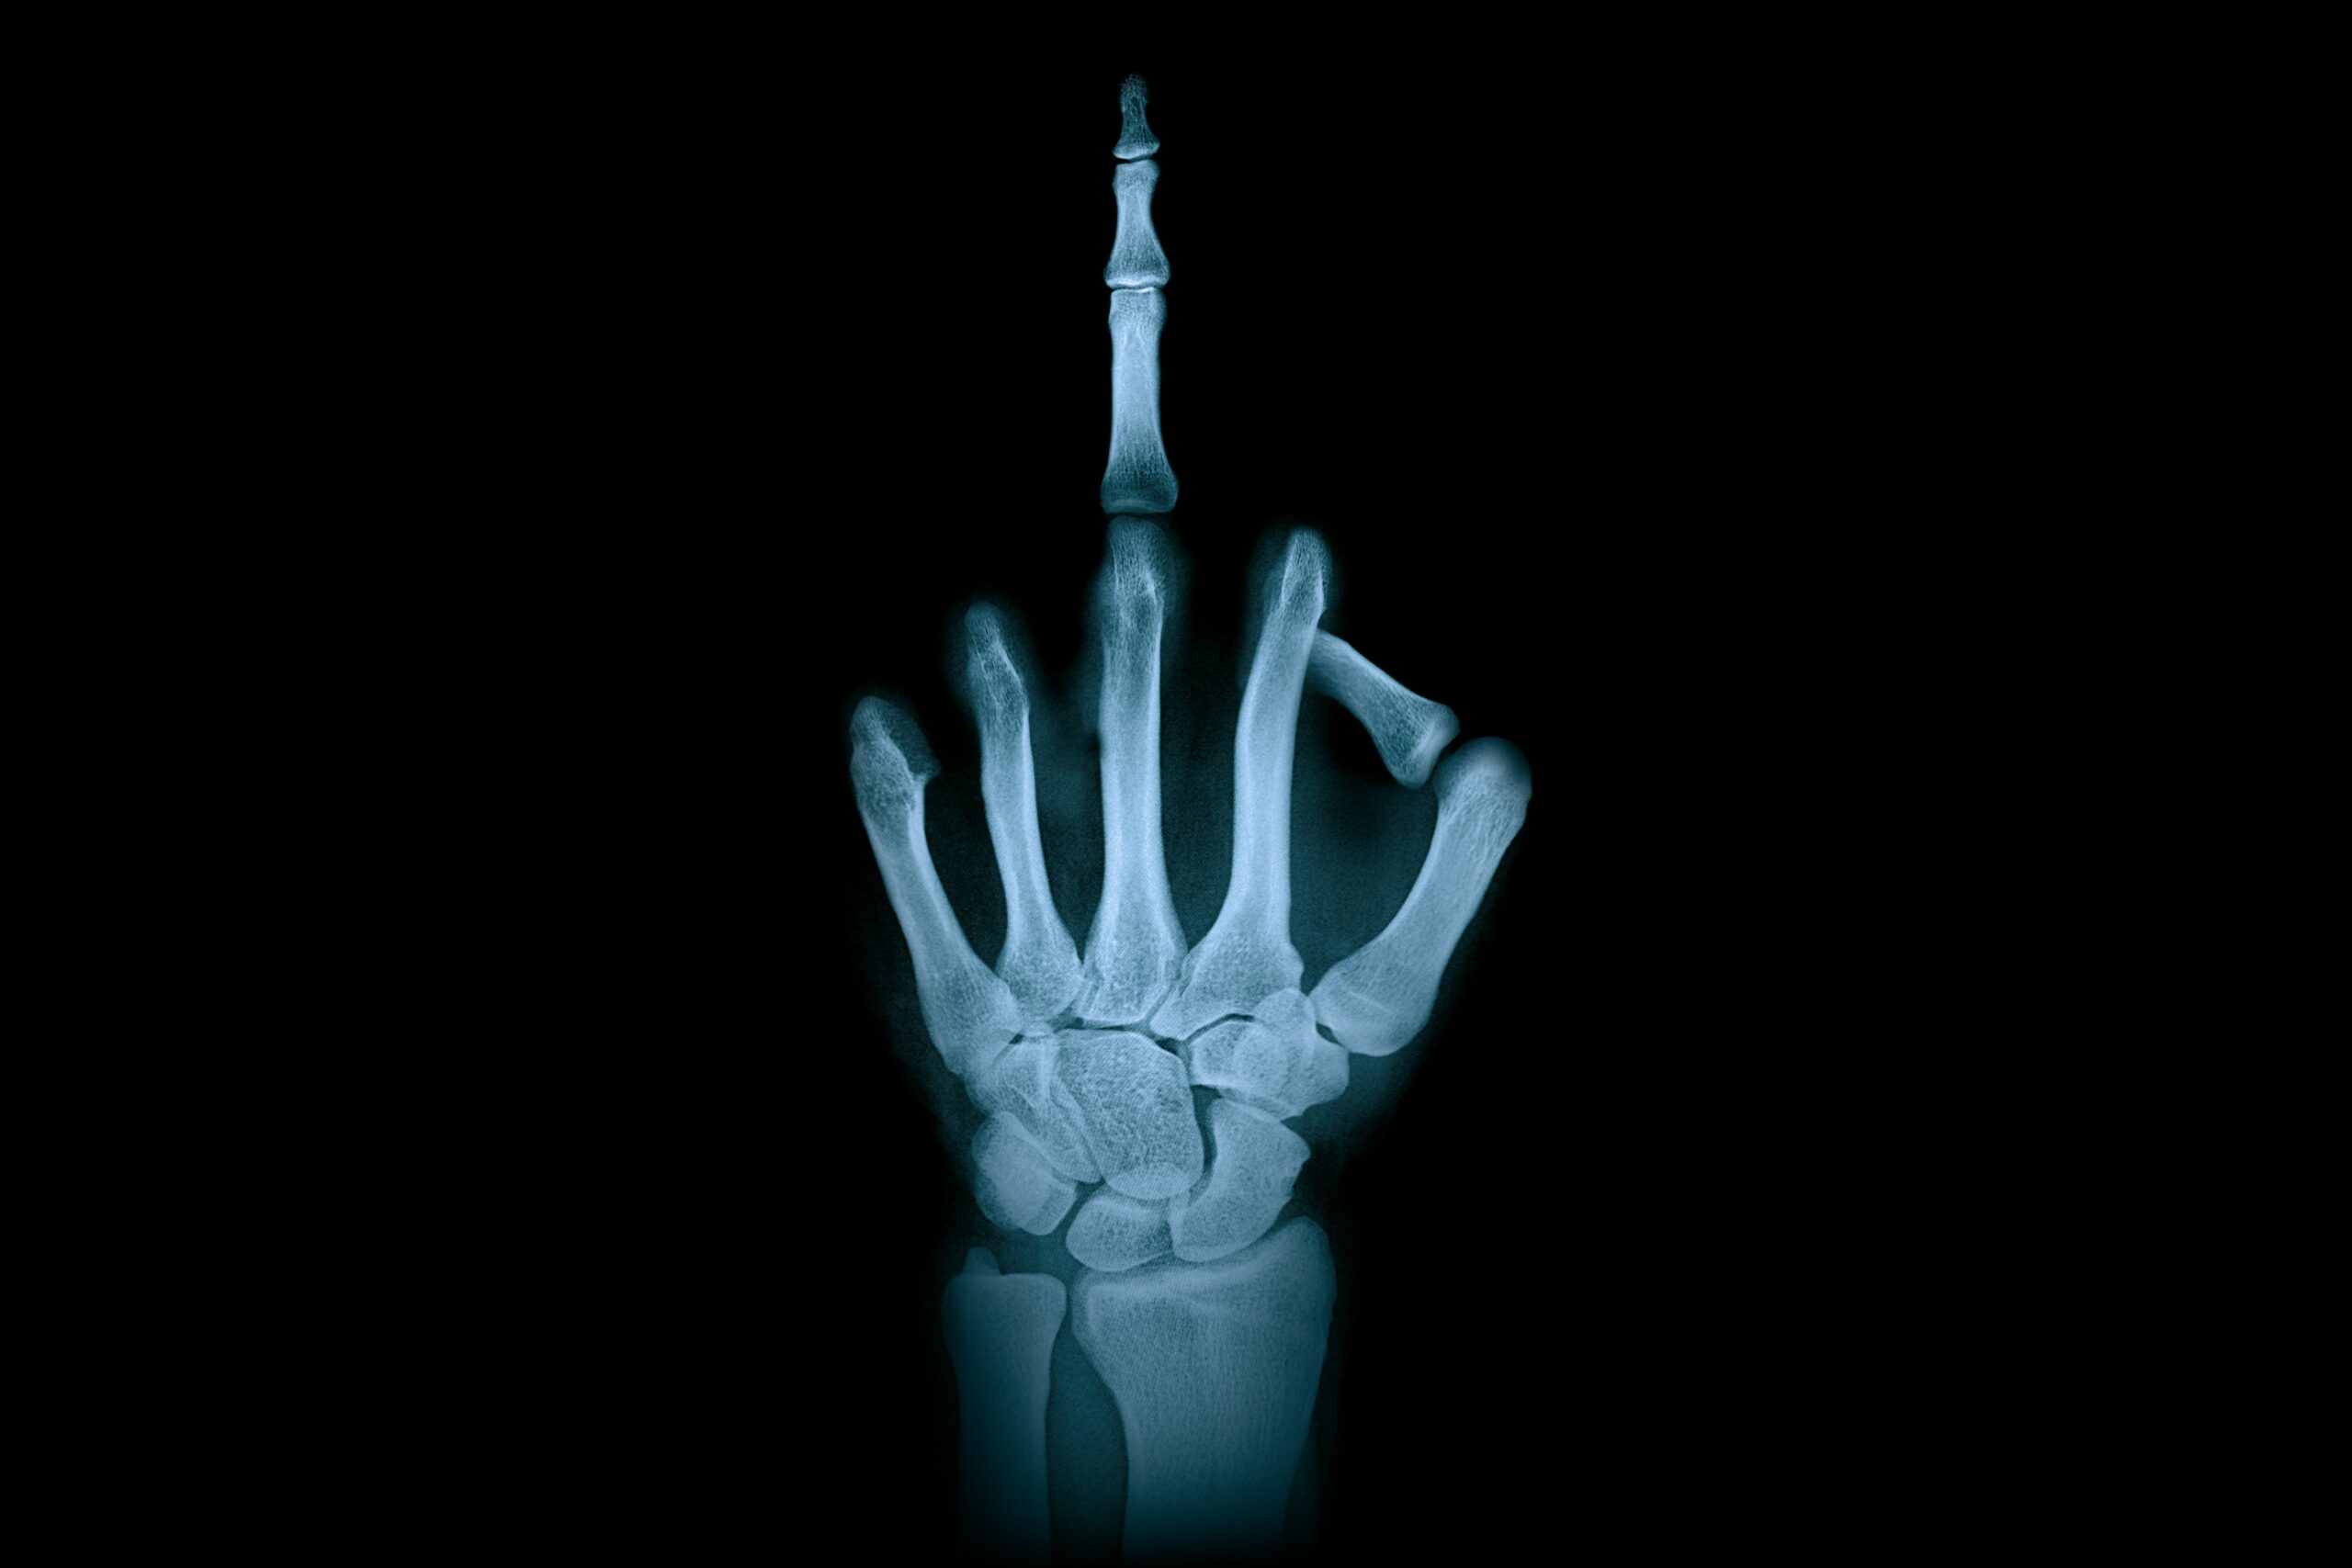 https://wuppertal-total.de/wp-content/uploads/2022/02/hand-middle-finger-x-ray-radiation-stockpack-pixabay-scaled.jpg